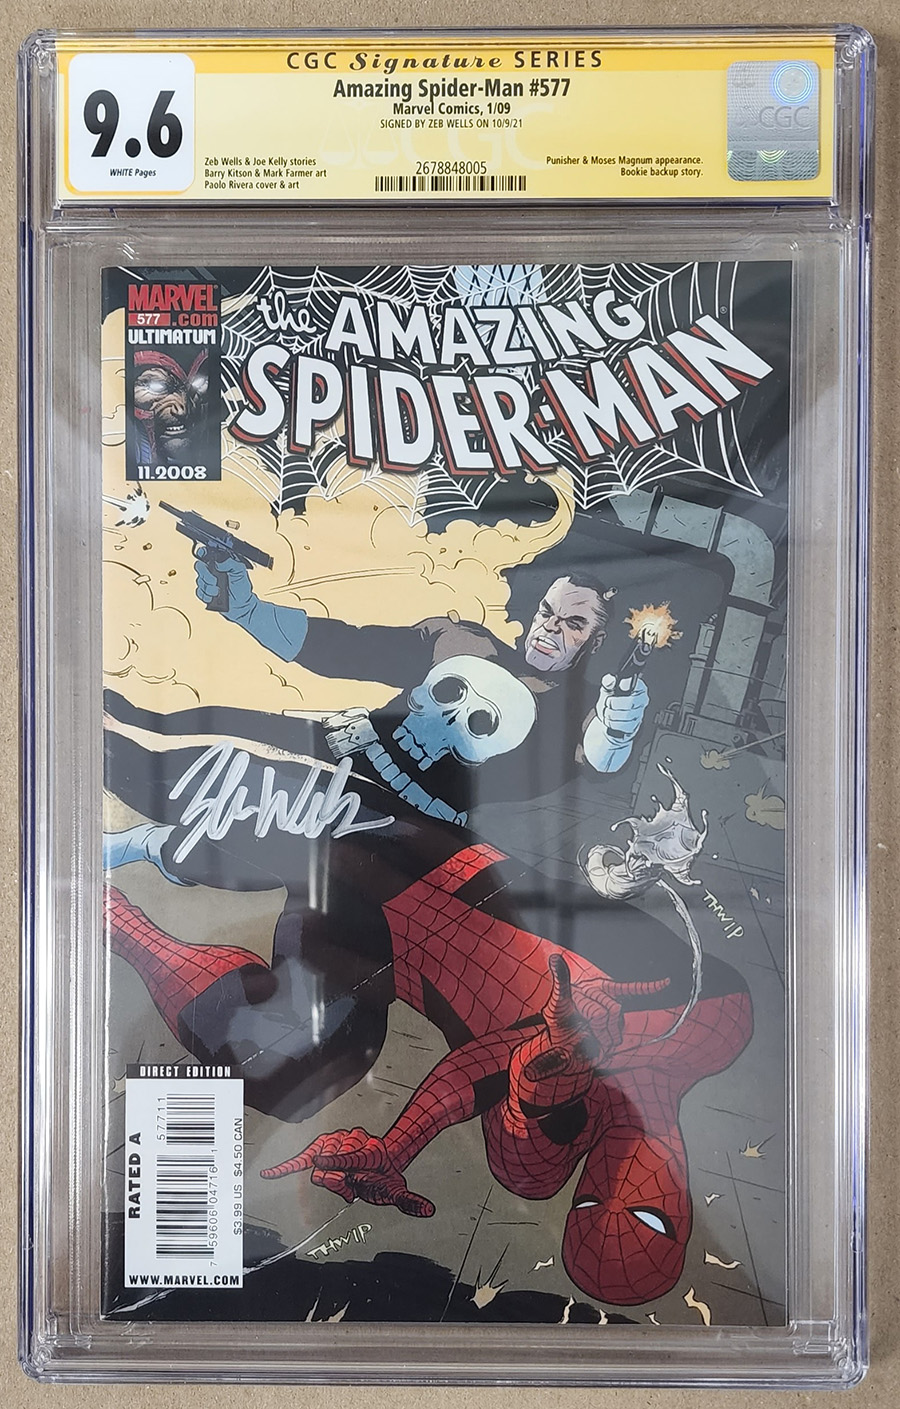 Amazing Spider-Man Vol 2 #577 Cover D Signed By Zeb Wells CGC 9.6